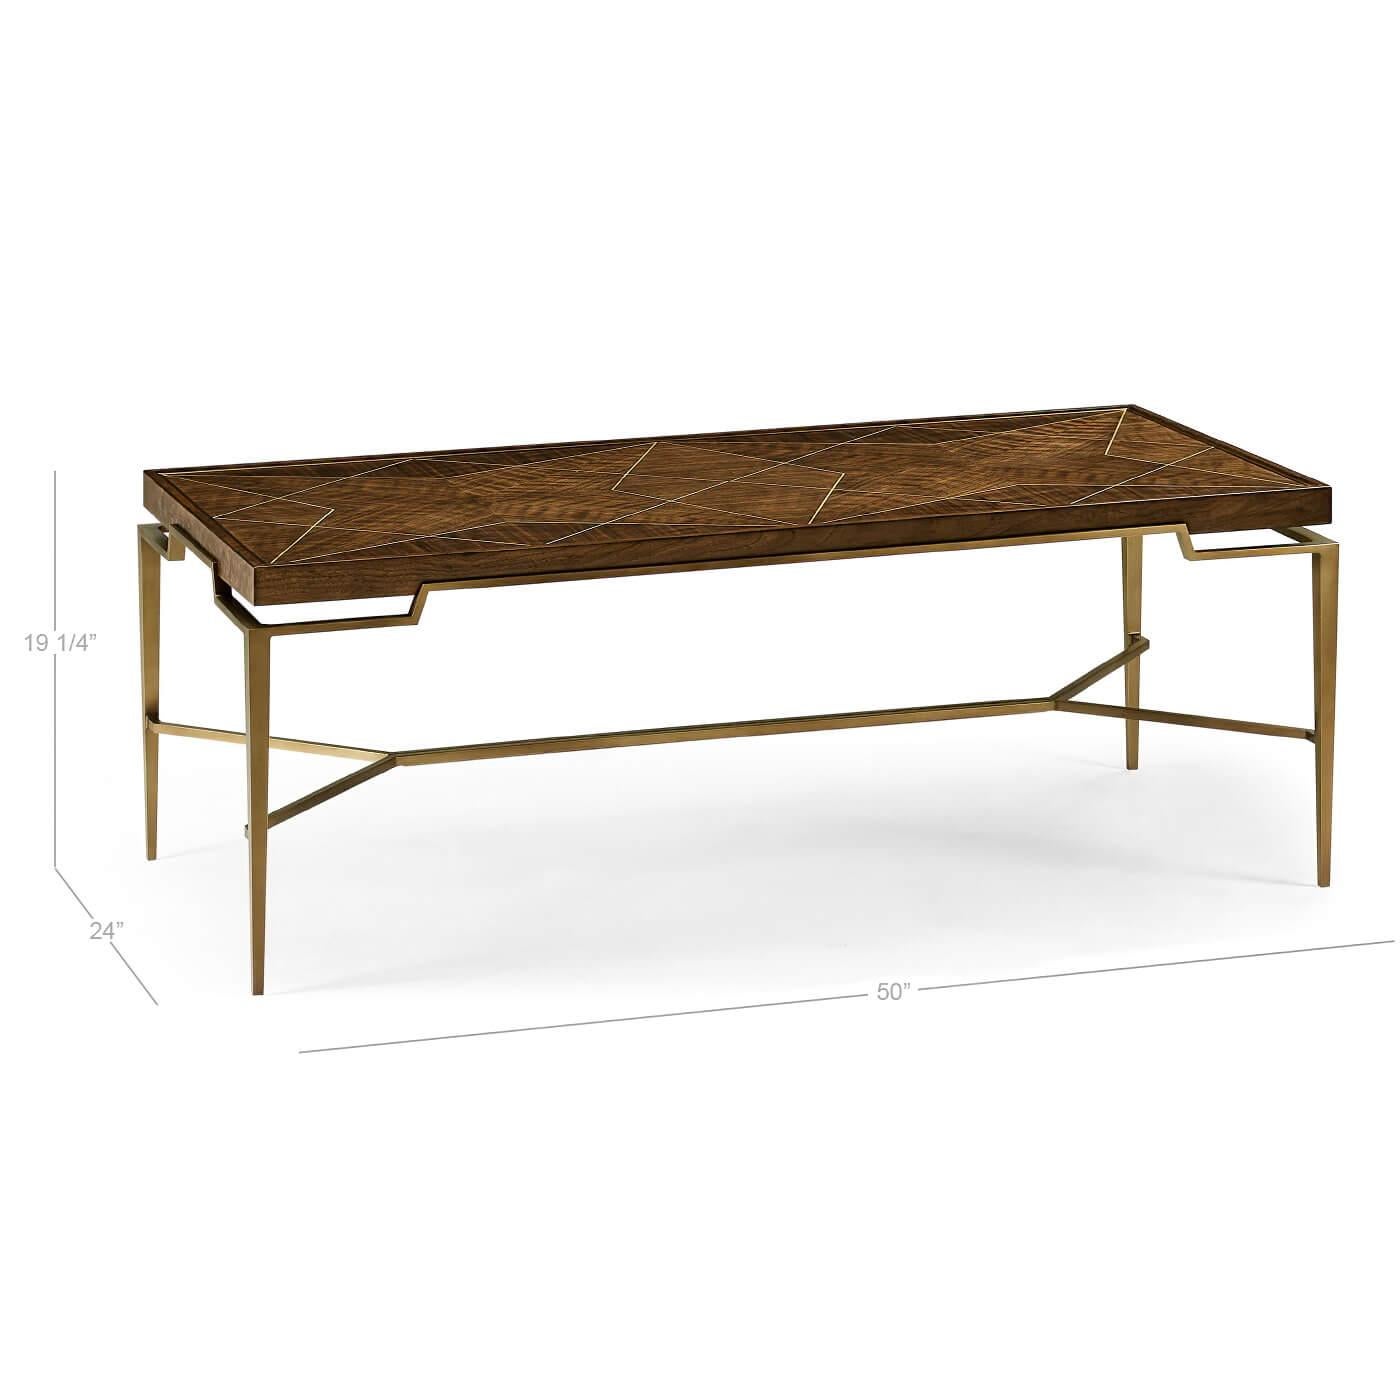 Vietnamese Midcentury Style Coffee Table For Sale